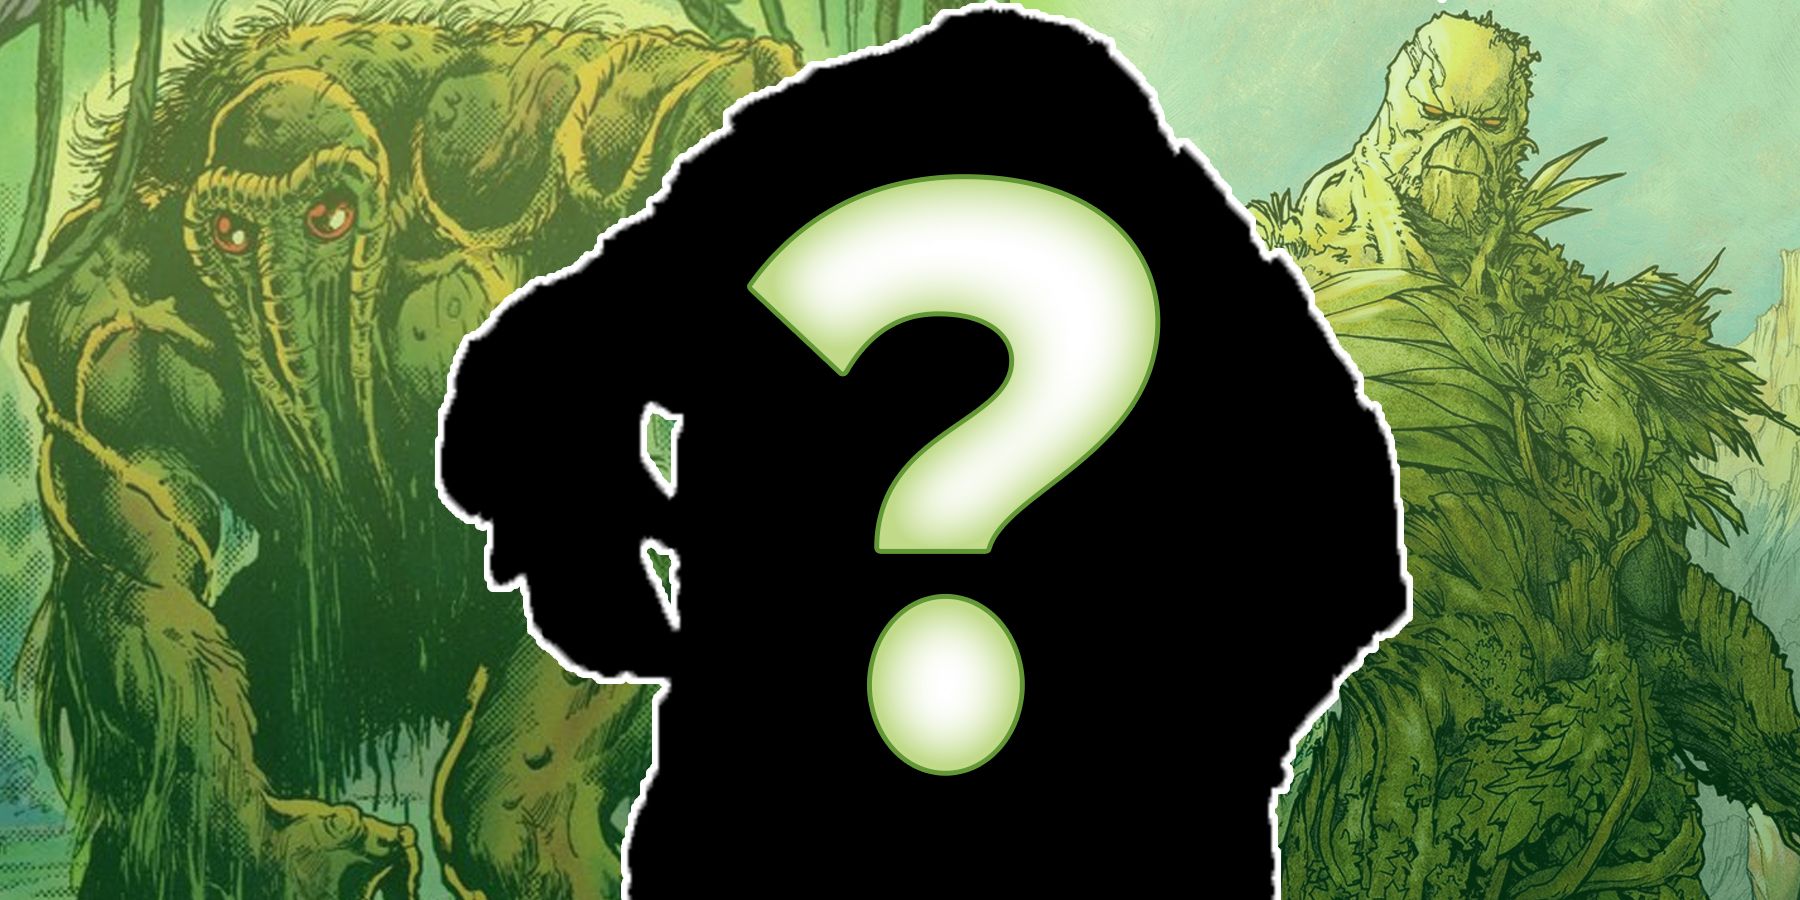 Man-Thing from Marvel comics, Swamp Thing from DC comics, and a mysterious silhouette in the middle with a question mark over it.